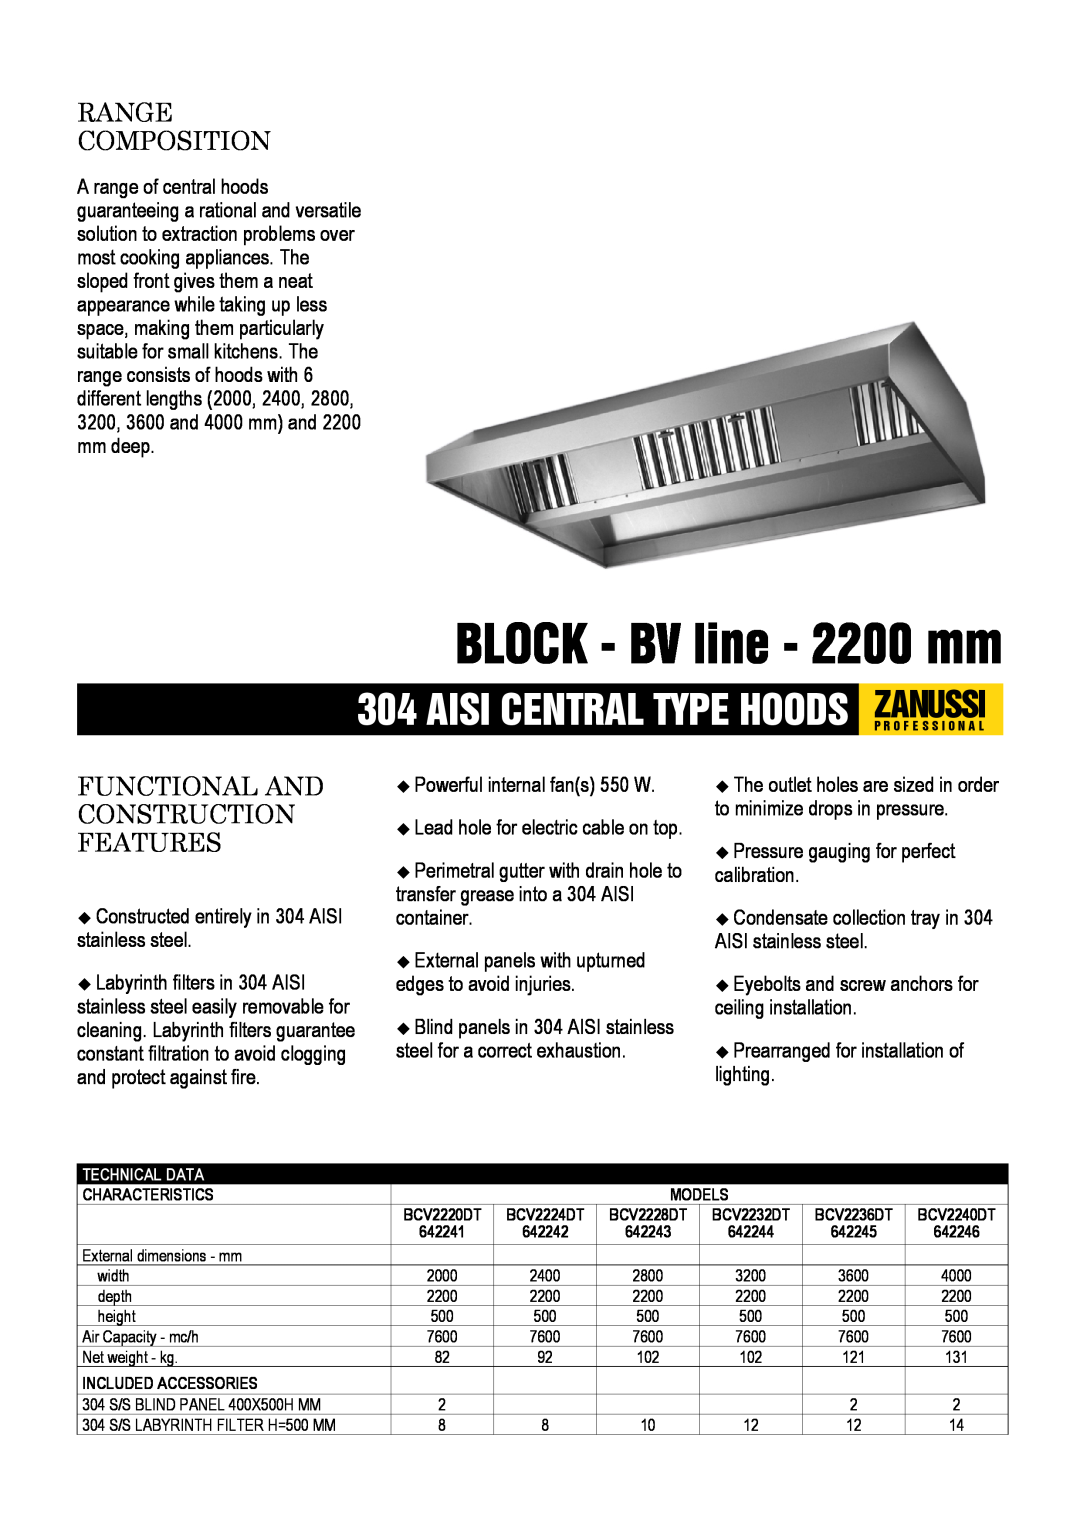 Electrolux BCV2240DT, 642246 dimensions BLOCK - BV line - 2200 mm, Aisi Central Type Hoods Zanussip R O F E S S I O N A L 